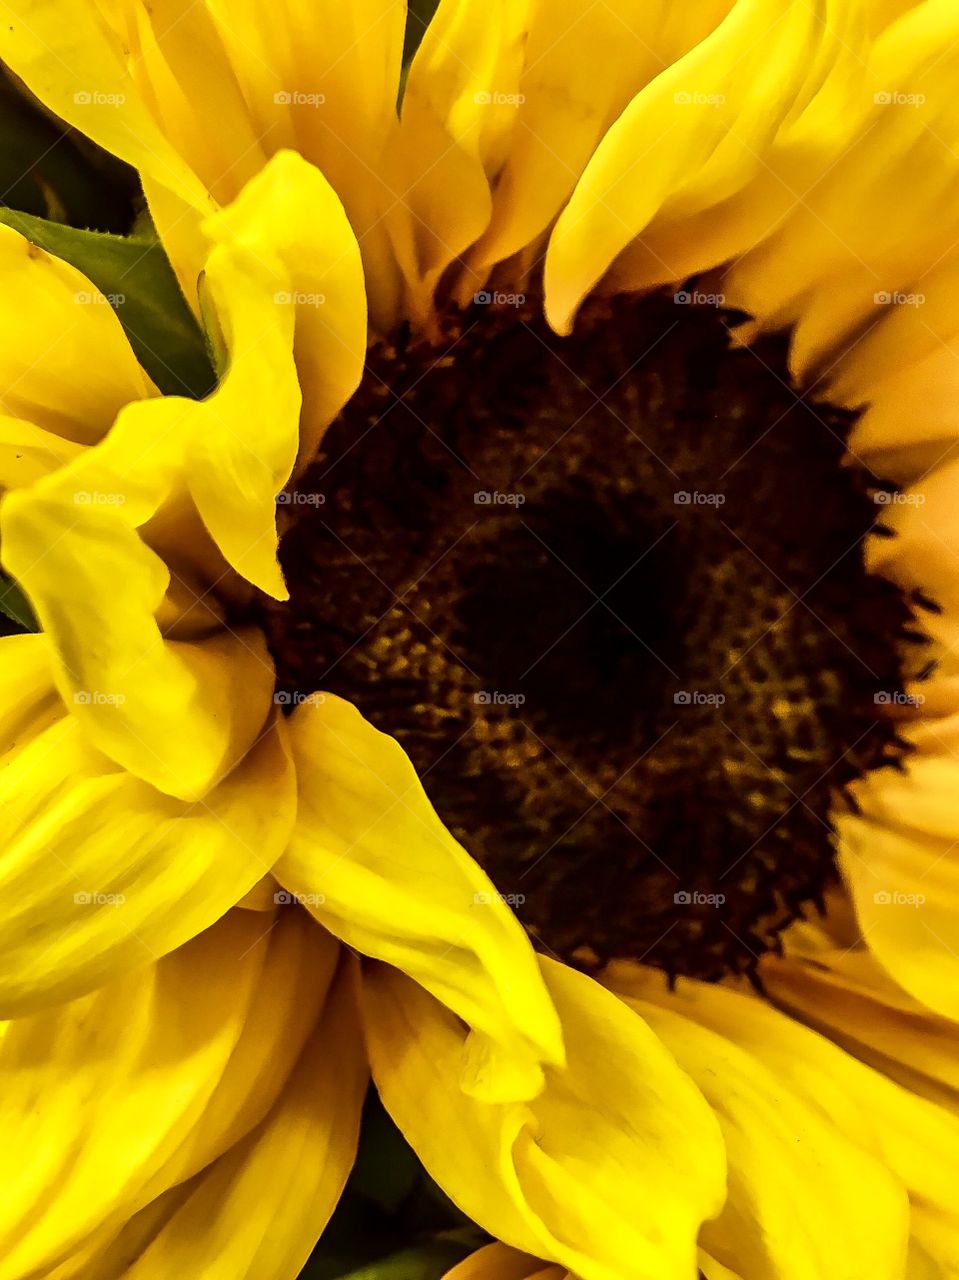 Extreme close-up of sunflower